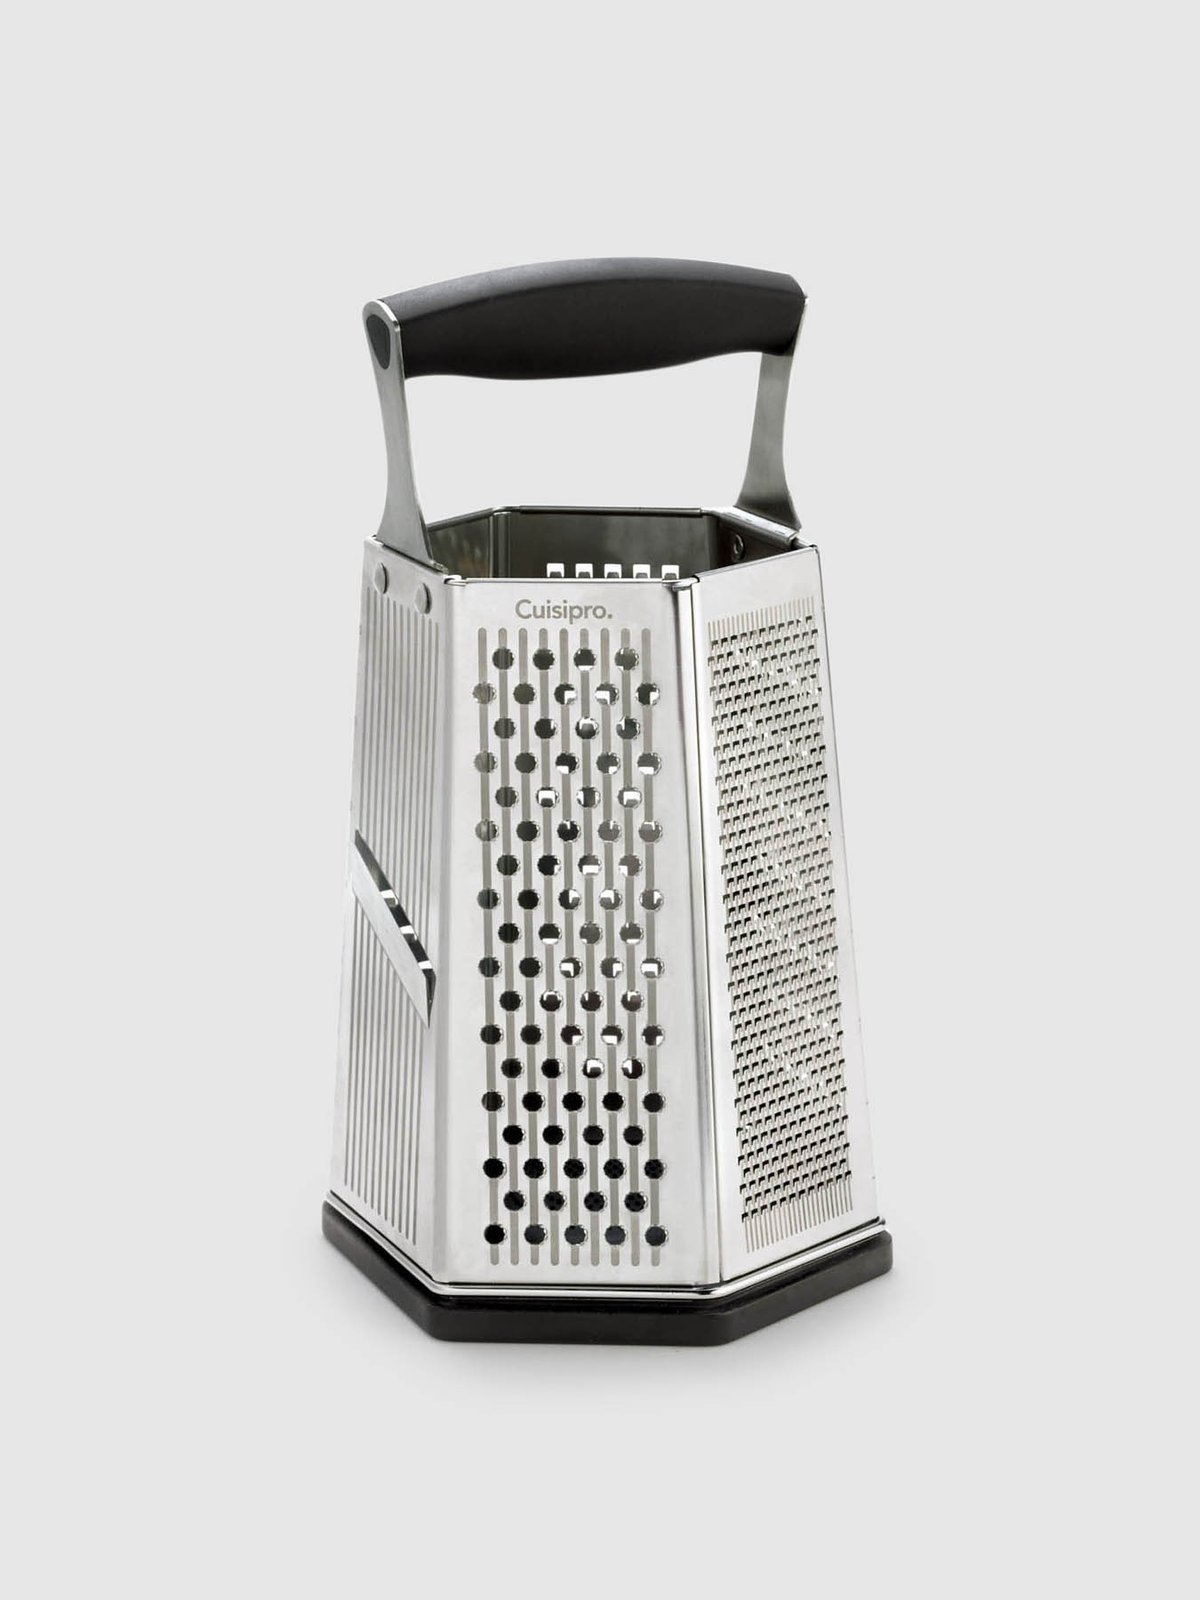 https://images.verishop.com/cuisipro-cuisipro-silver-6-sided-box-grater/M00065506068770-2788012341?auto=format&cs=strip&fit=max&w=1200